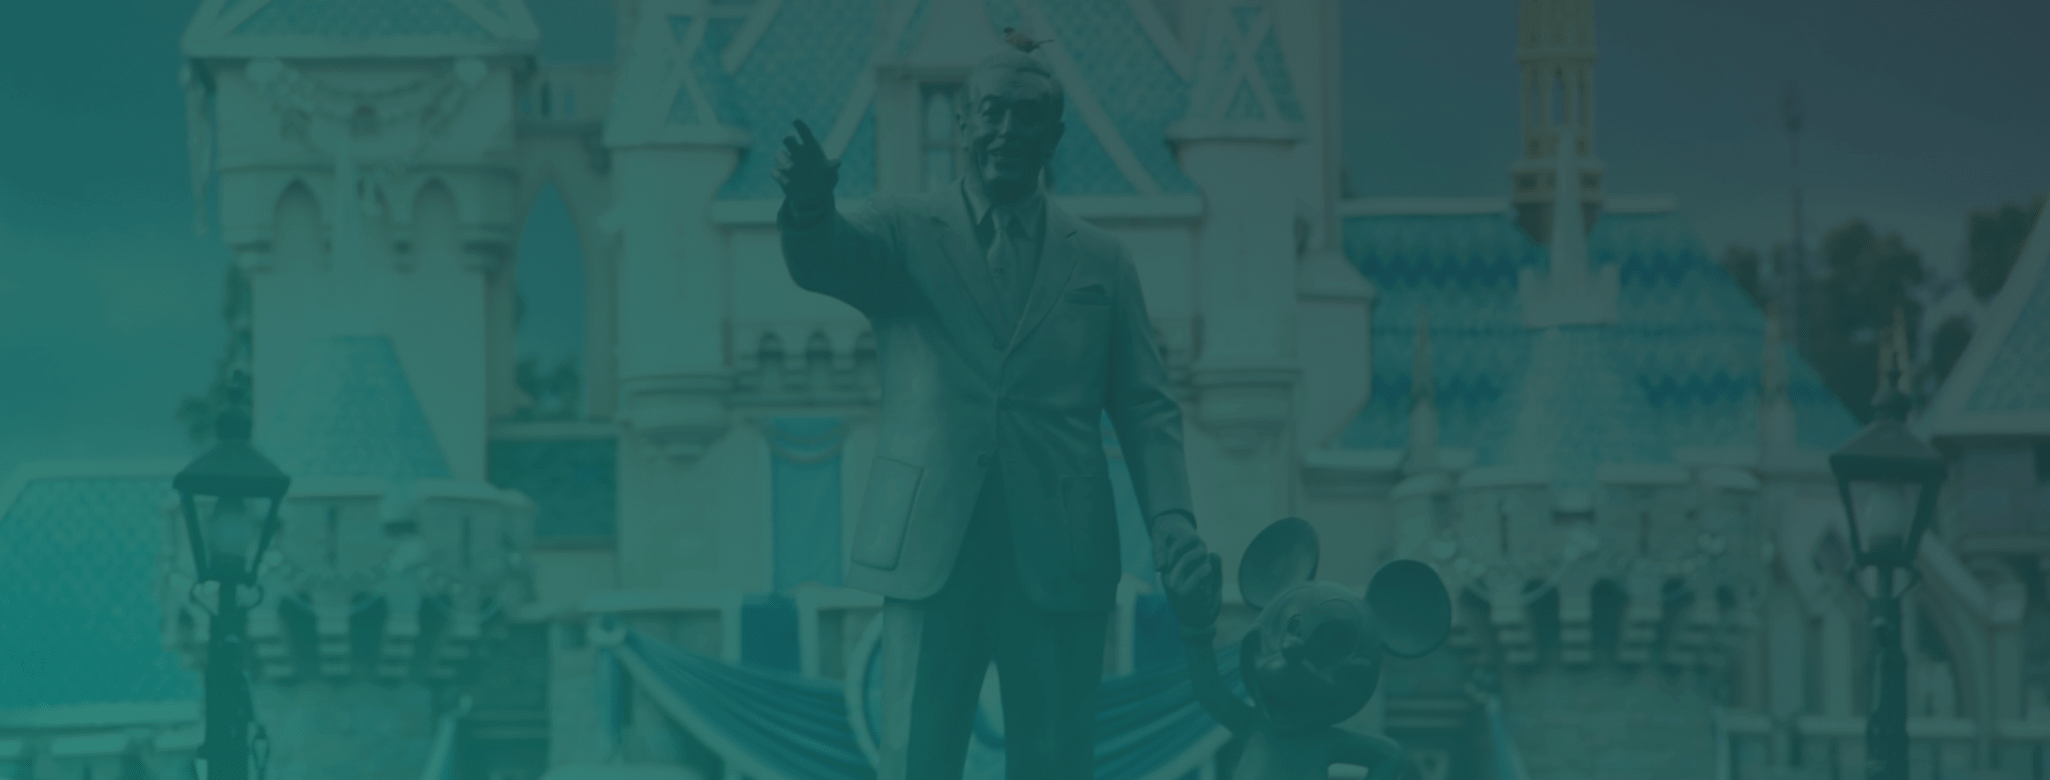 6 Lessons Every Entrepreneur Should Learn From Walt Disney